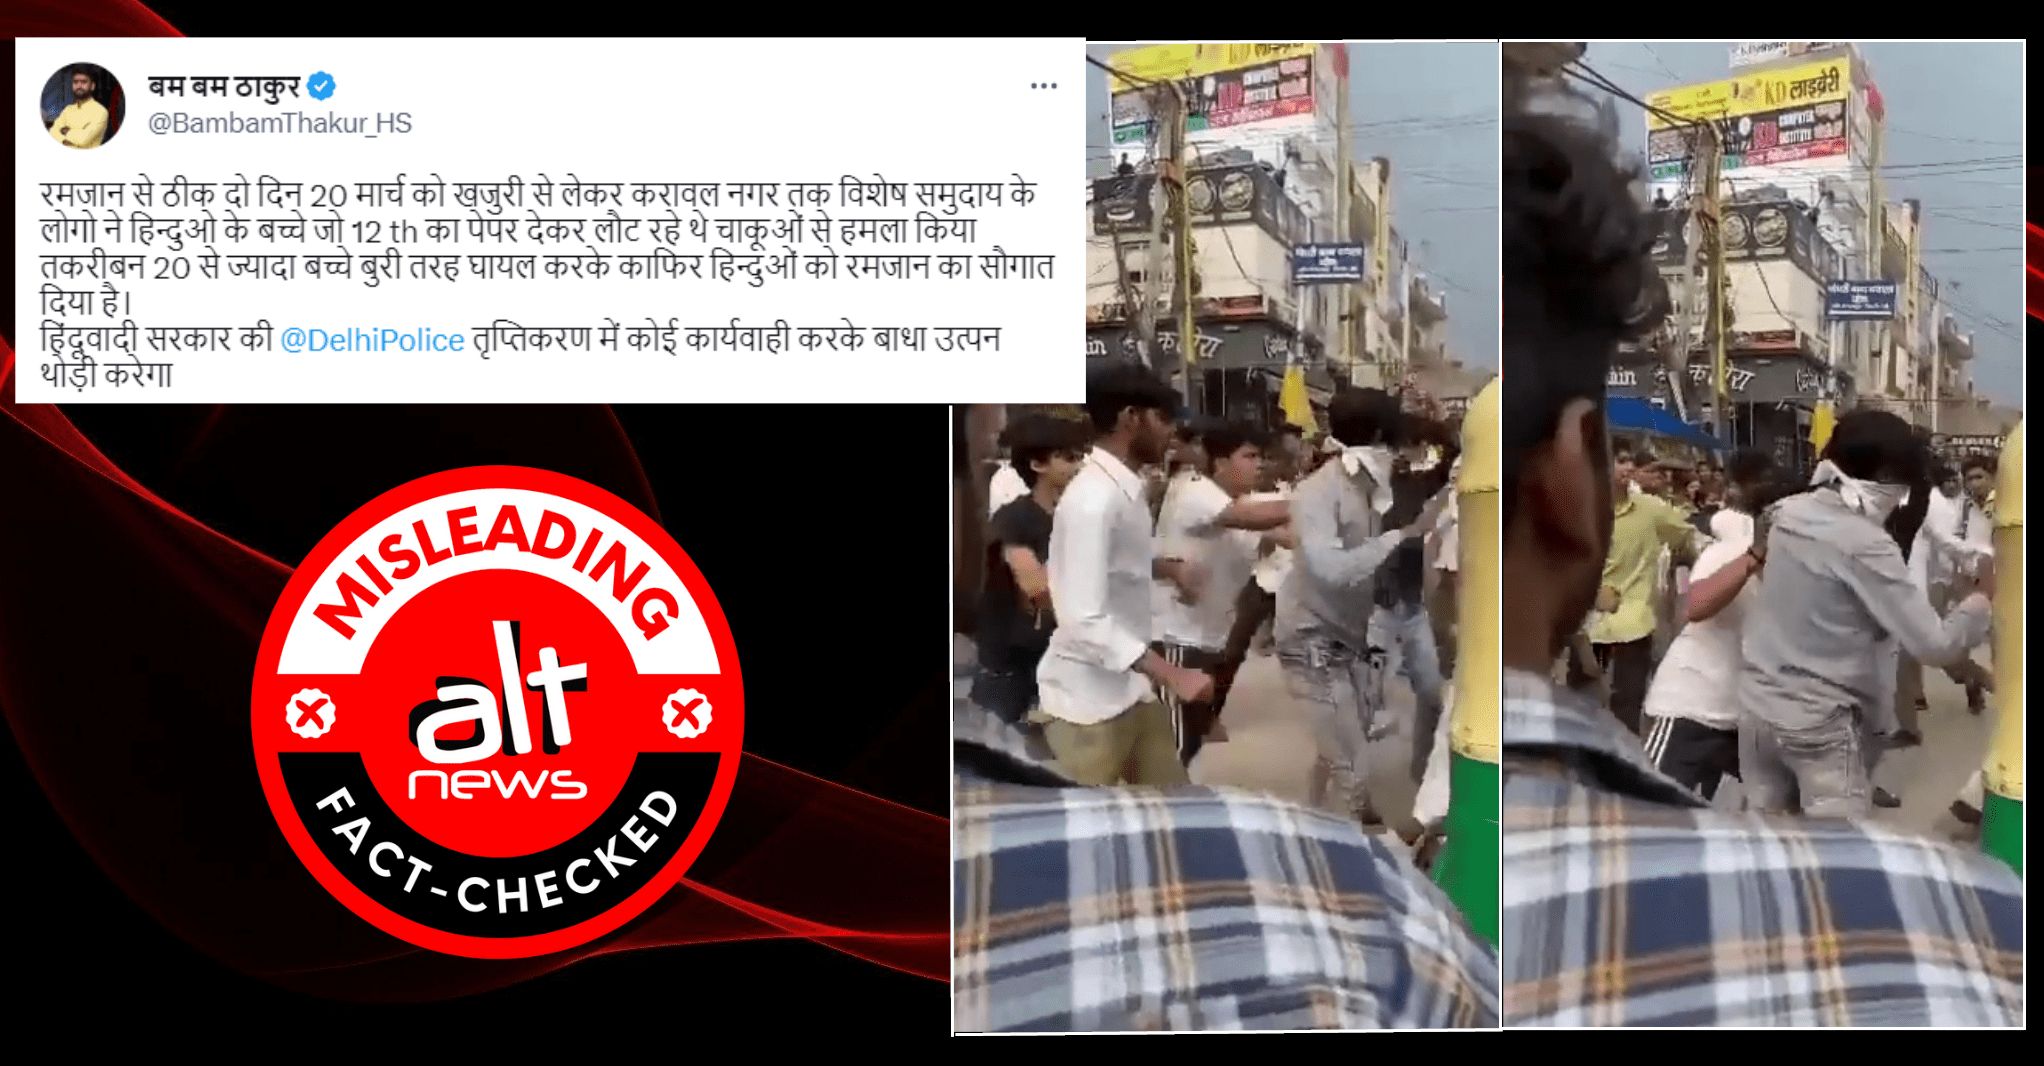 School-goers clash with knives in Delhi, videos viral with false communal claim - Alt News